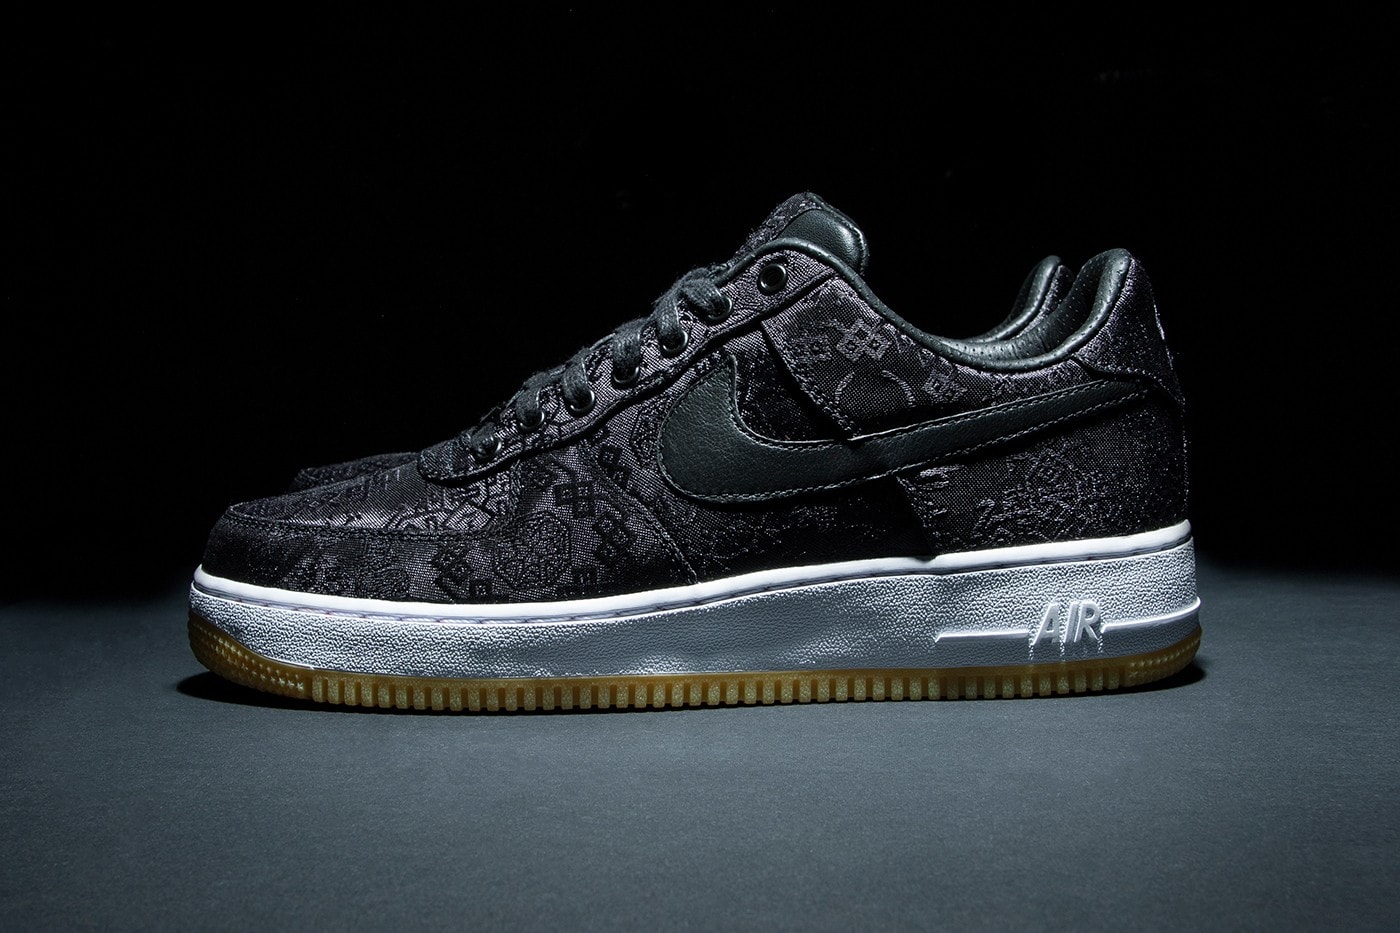 fragment design CLOT Nike Air Force 1 Black Silk Official Look black red release info date Shibuya Parco POP by Jun Buy